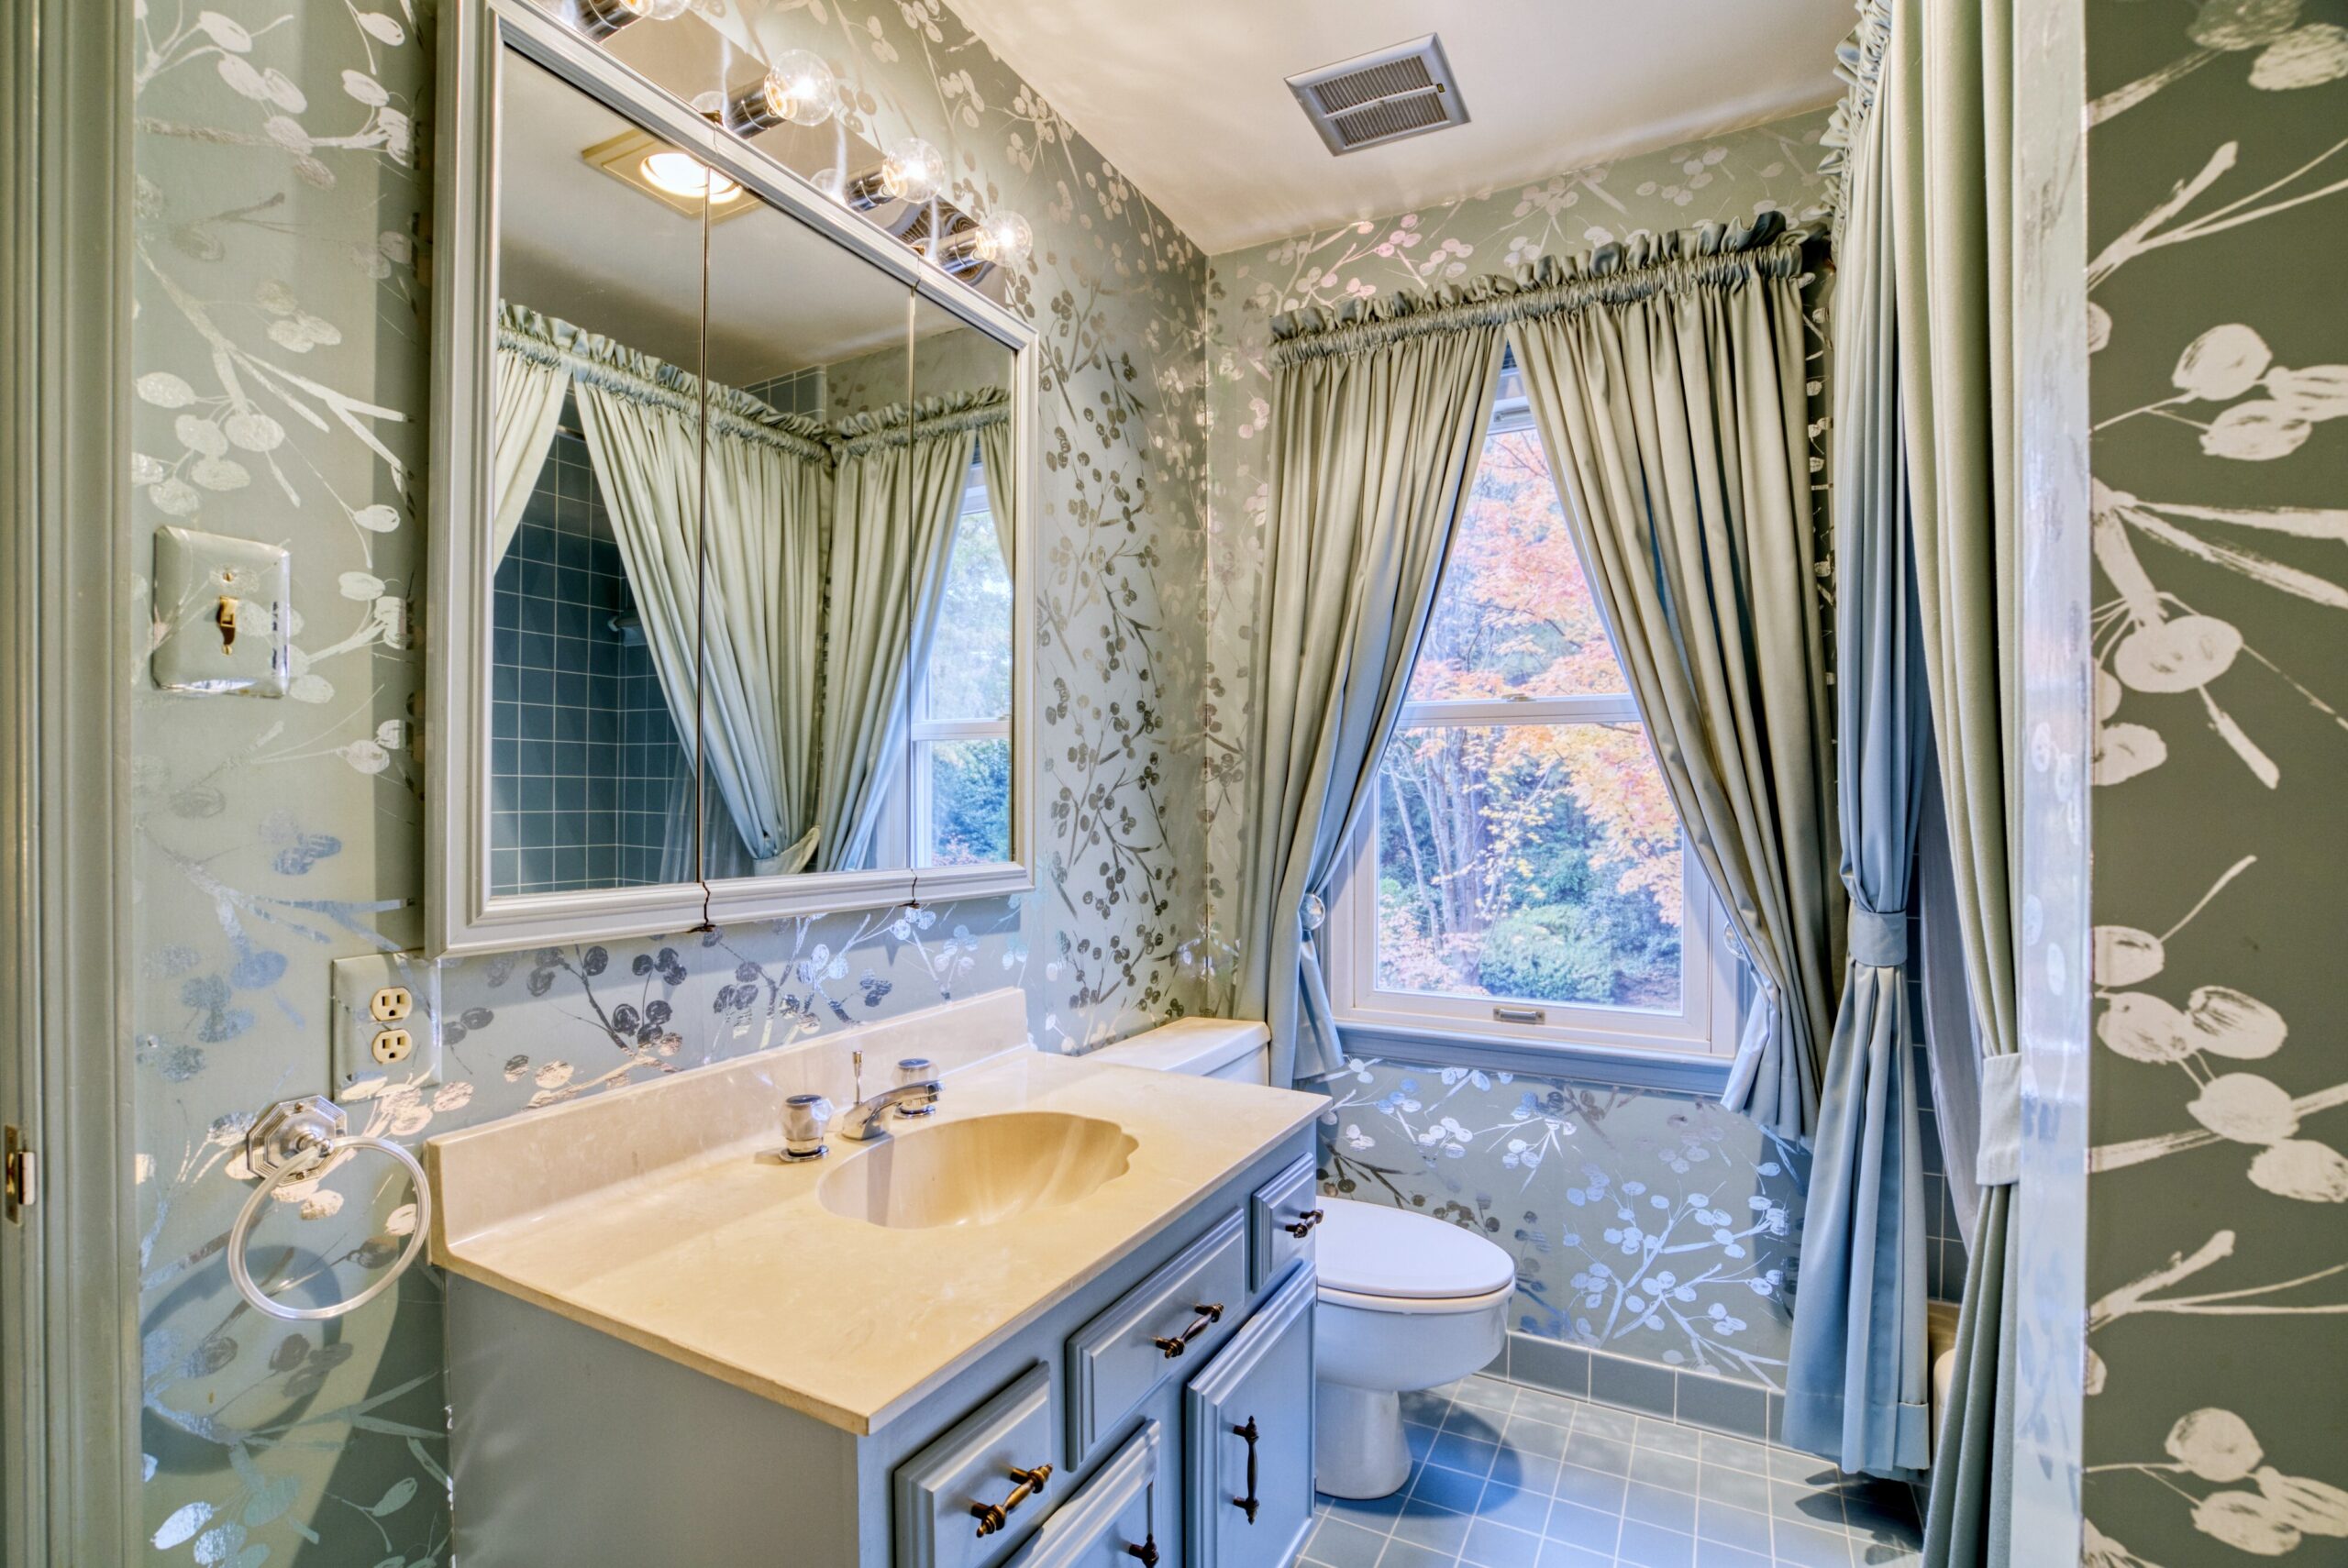 Interior professional photo of 1324 Skipwith Road - a full bathroom with antique blue shiny wallpaper and long window and shower curtains